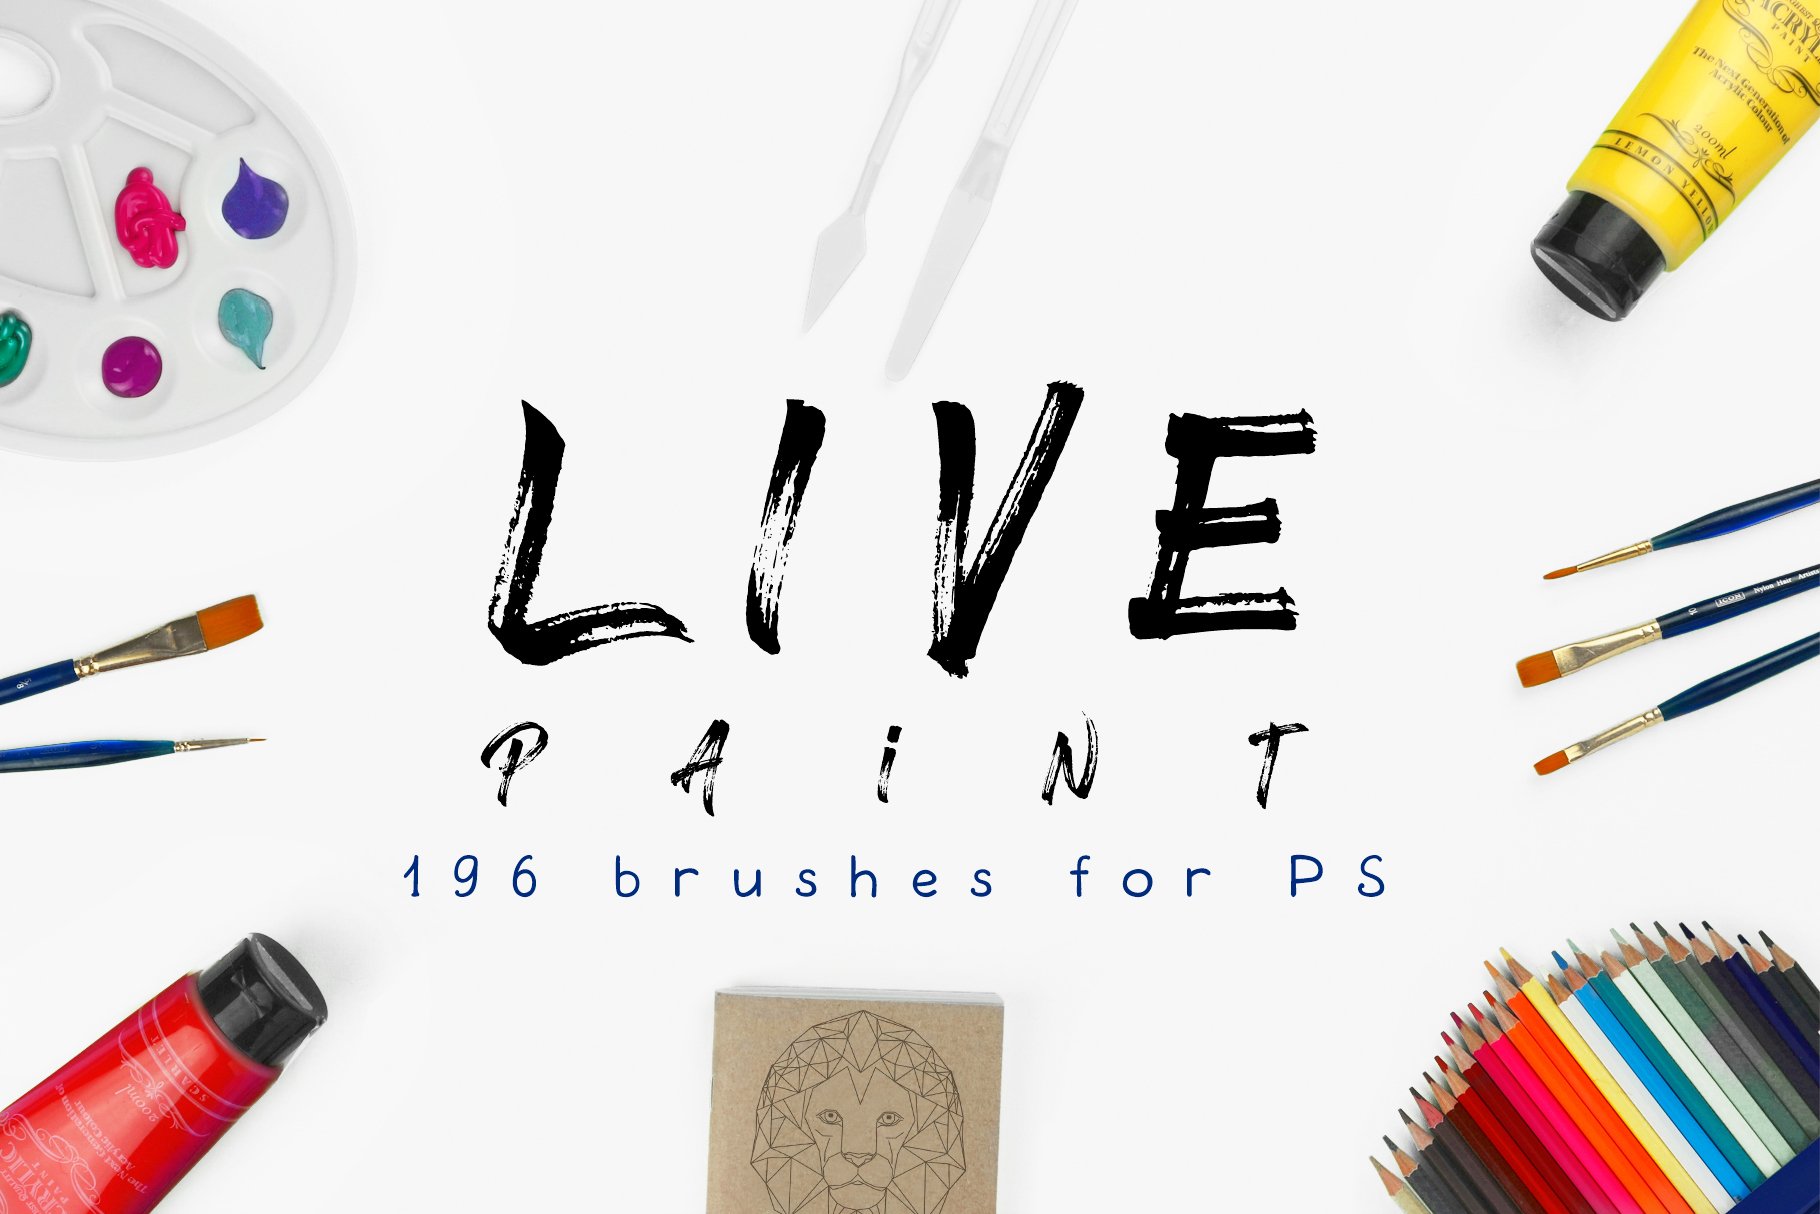 Live paint brushes for PScover image.